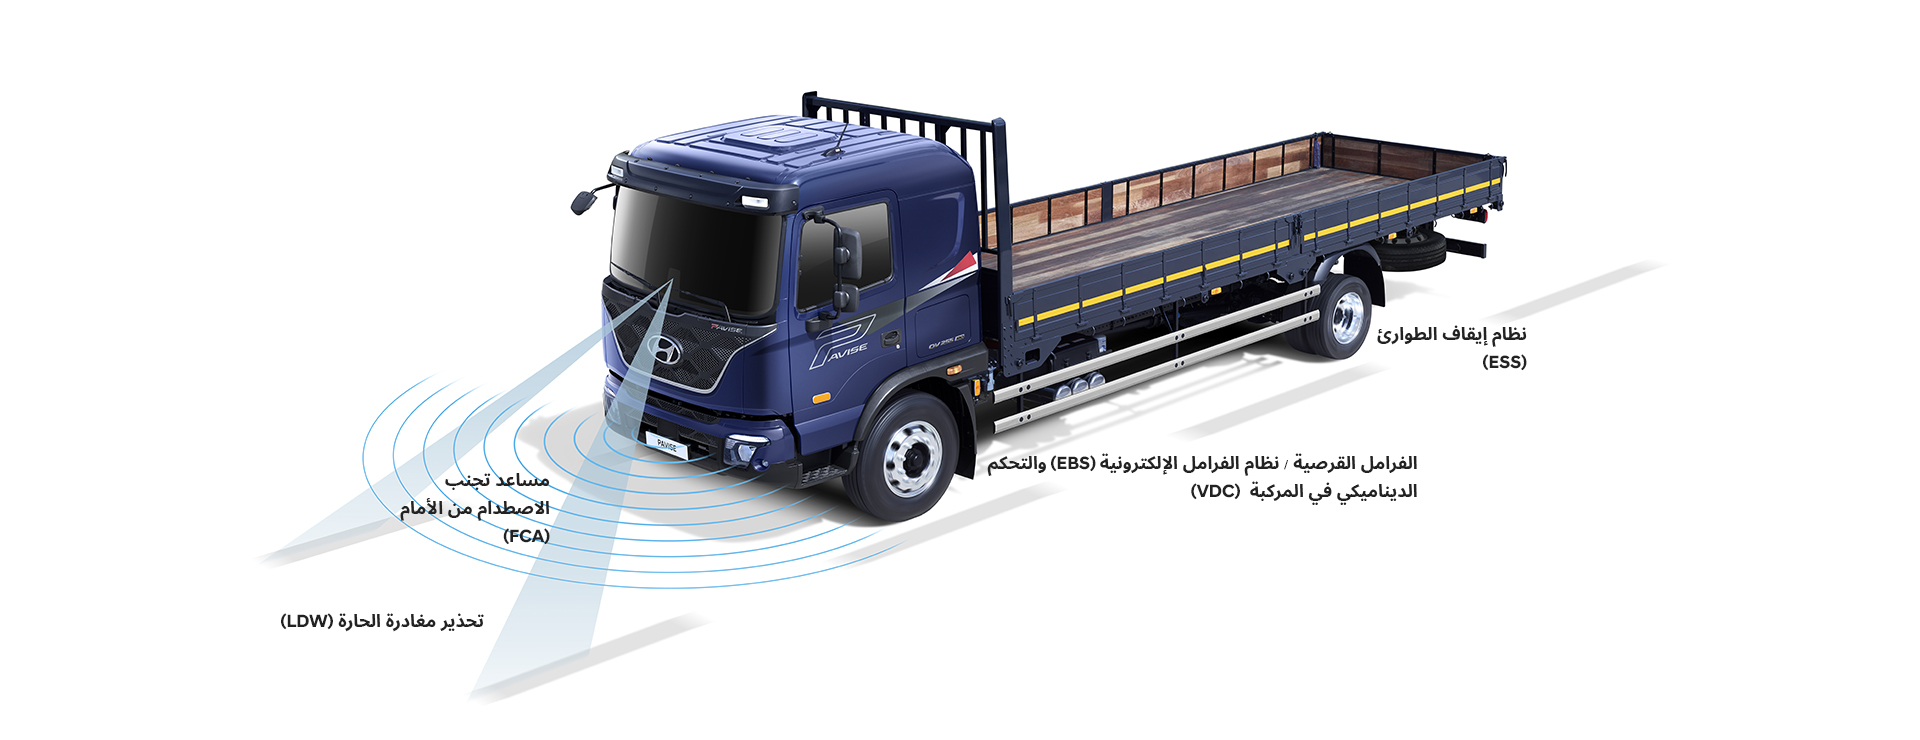 PAVISE’s safety systems protect you in a variety of different ways and it starts with the cab.